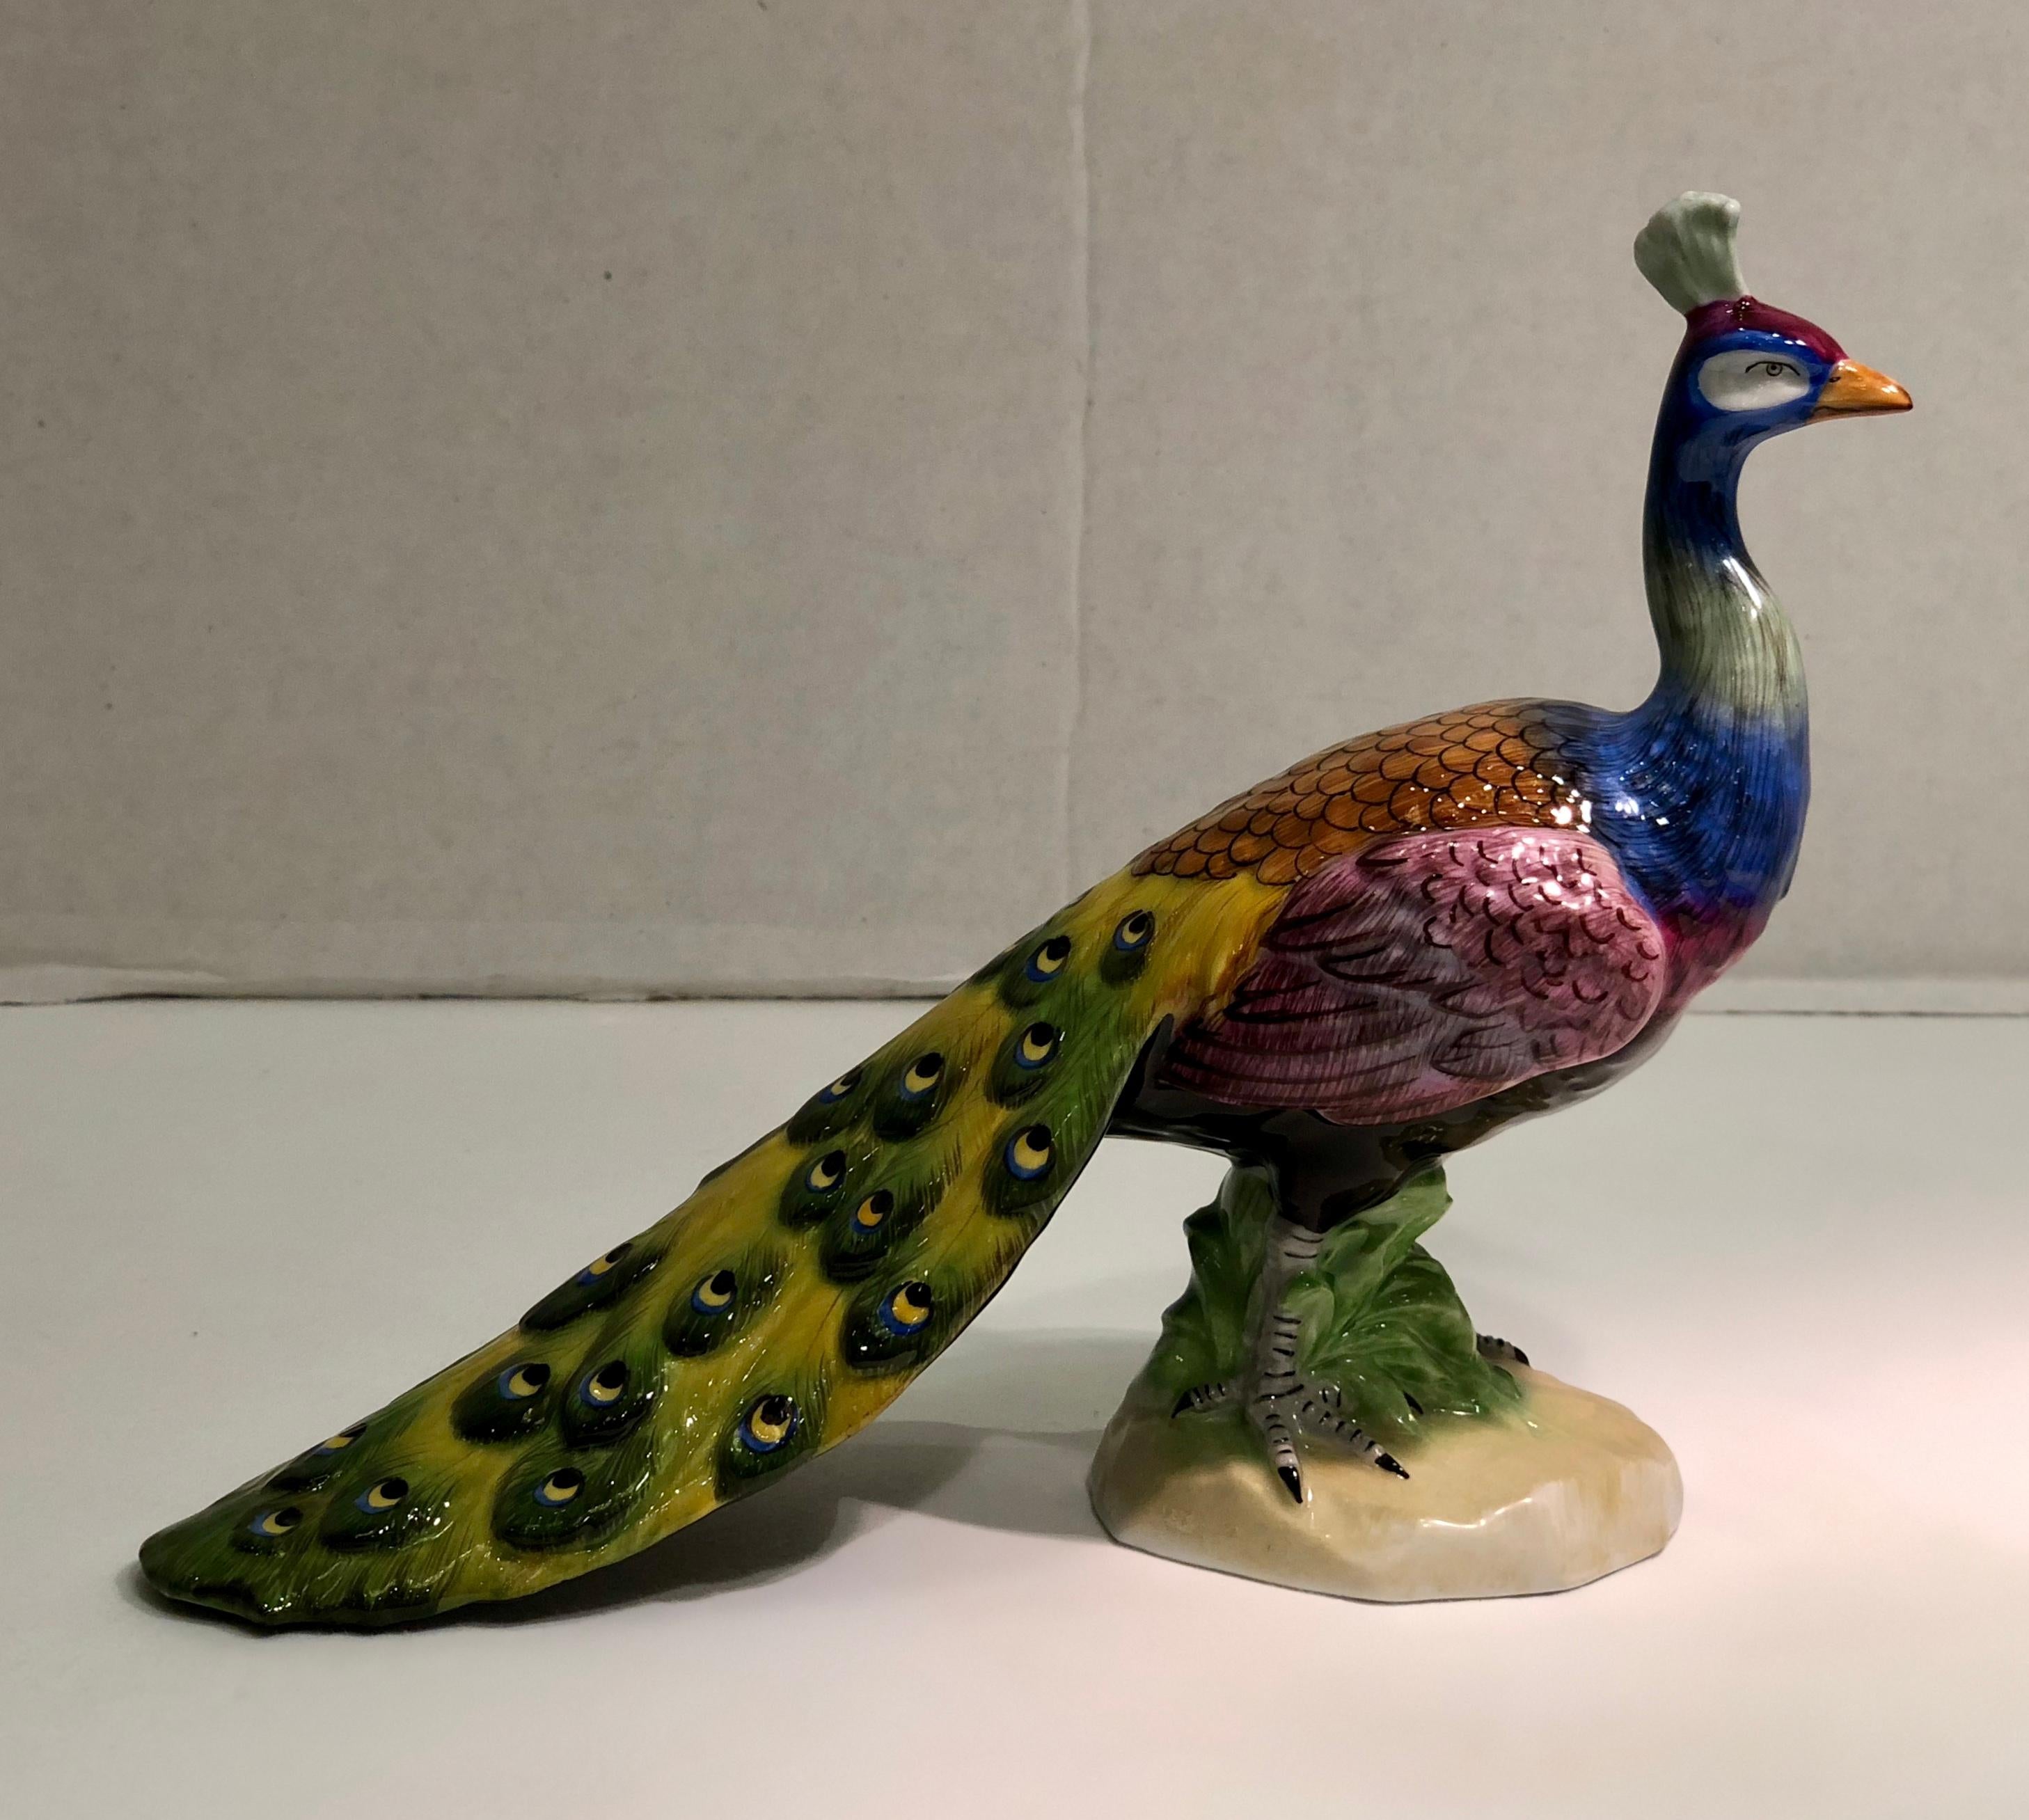 Exquisite Dresden Porcelain Peacock Tail Closed Facing Forward Figurine Germany For Sale 3